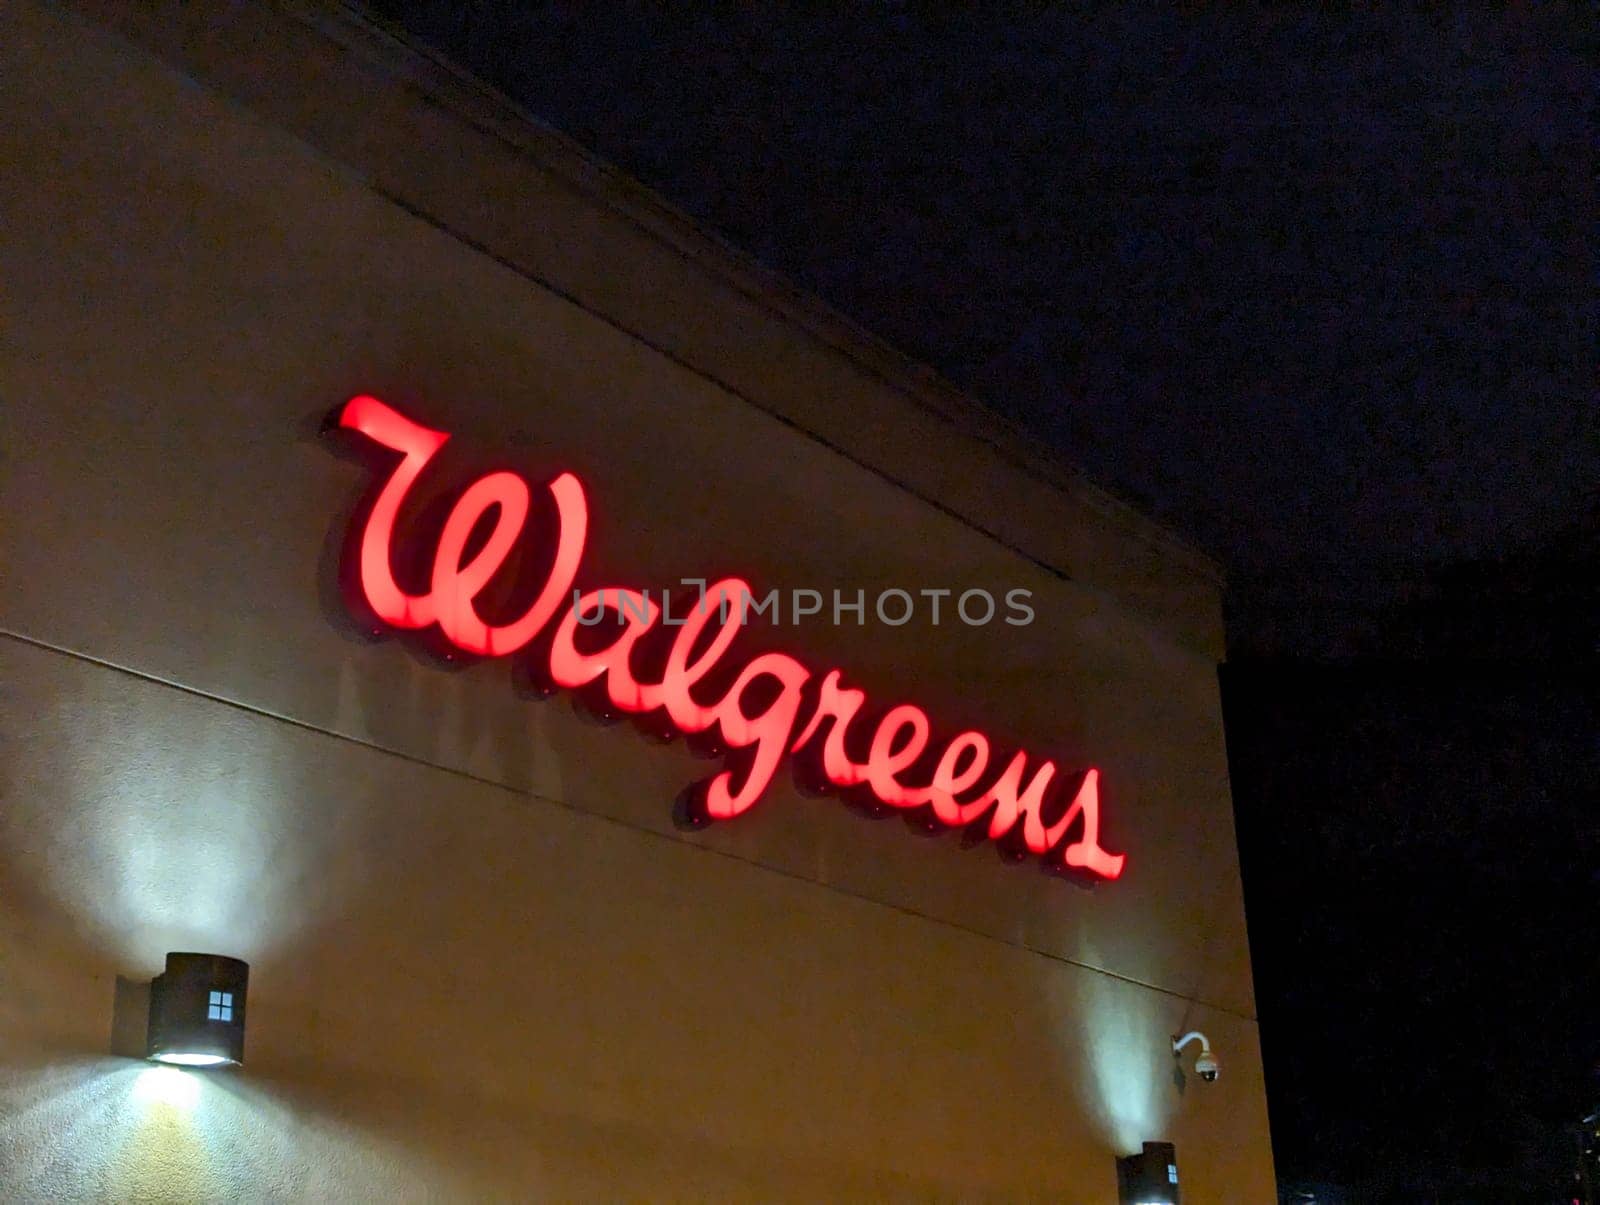 Walgreens Logo on Storefront at Night by EricGBVD